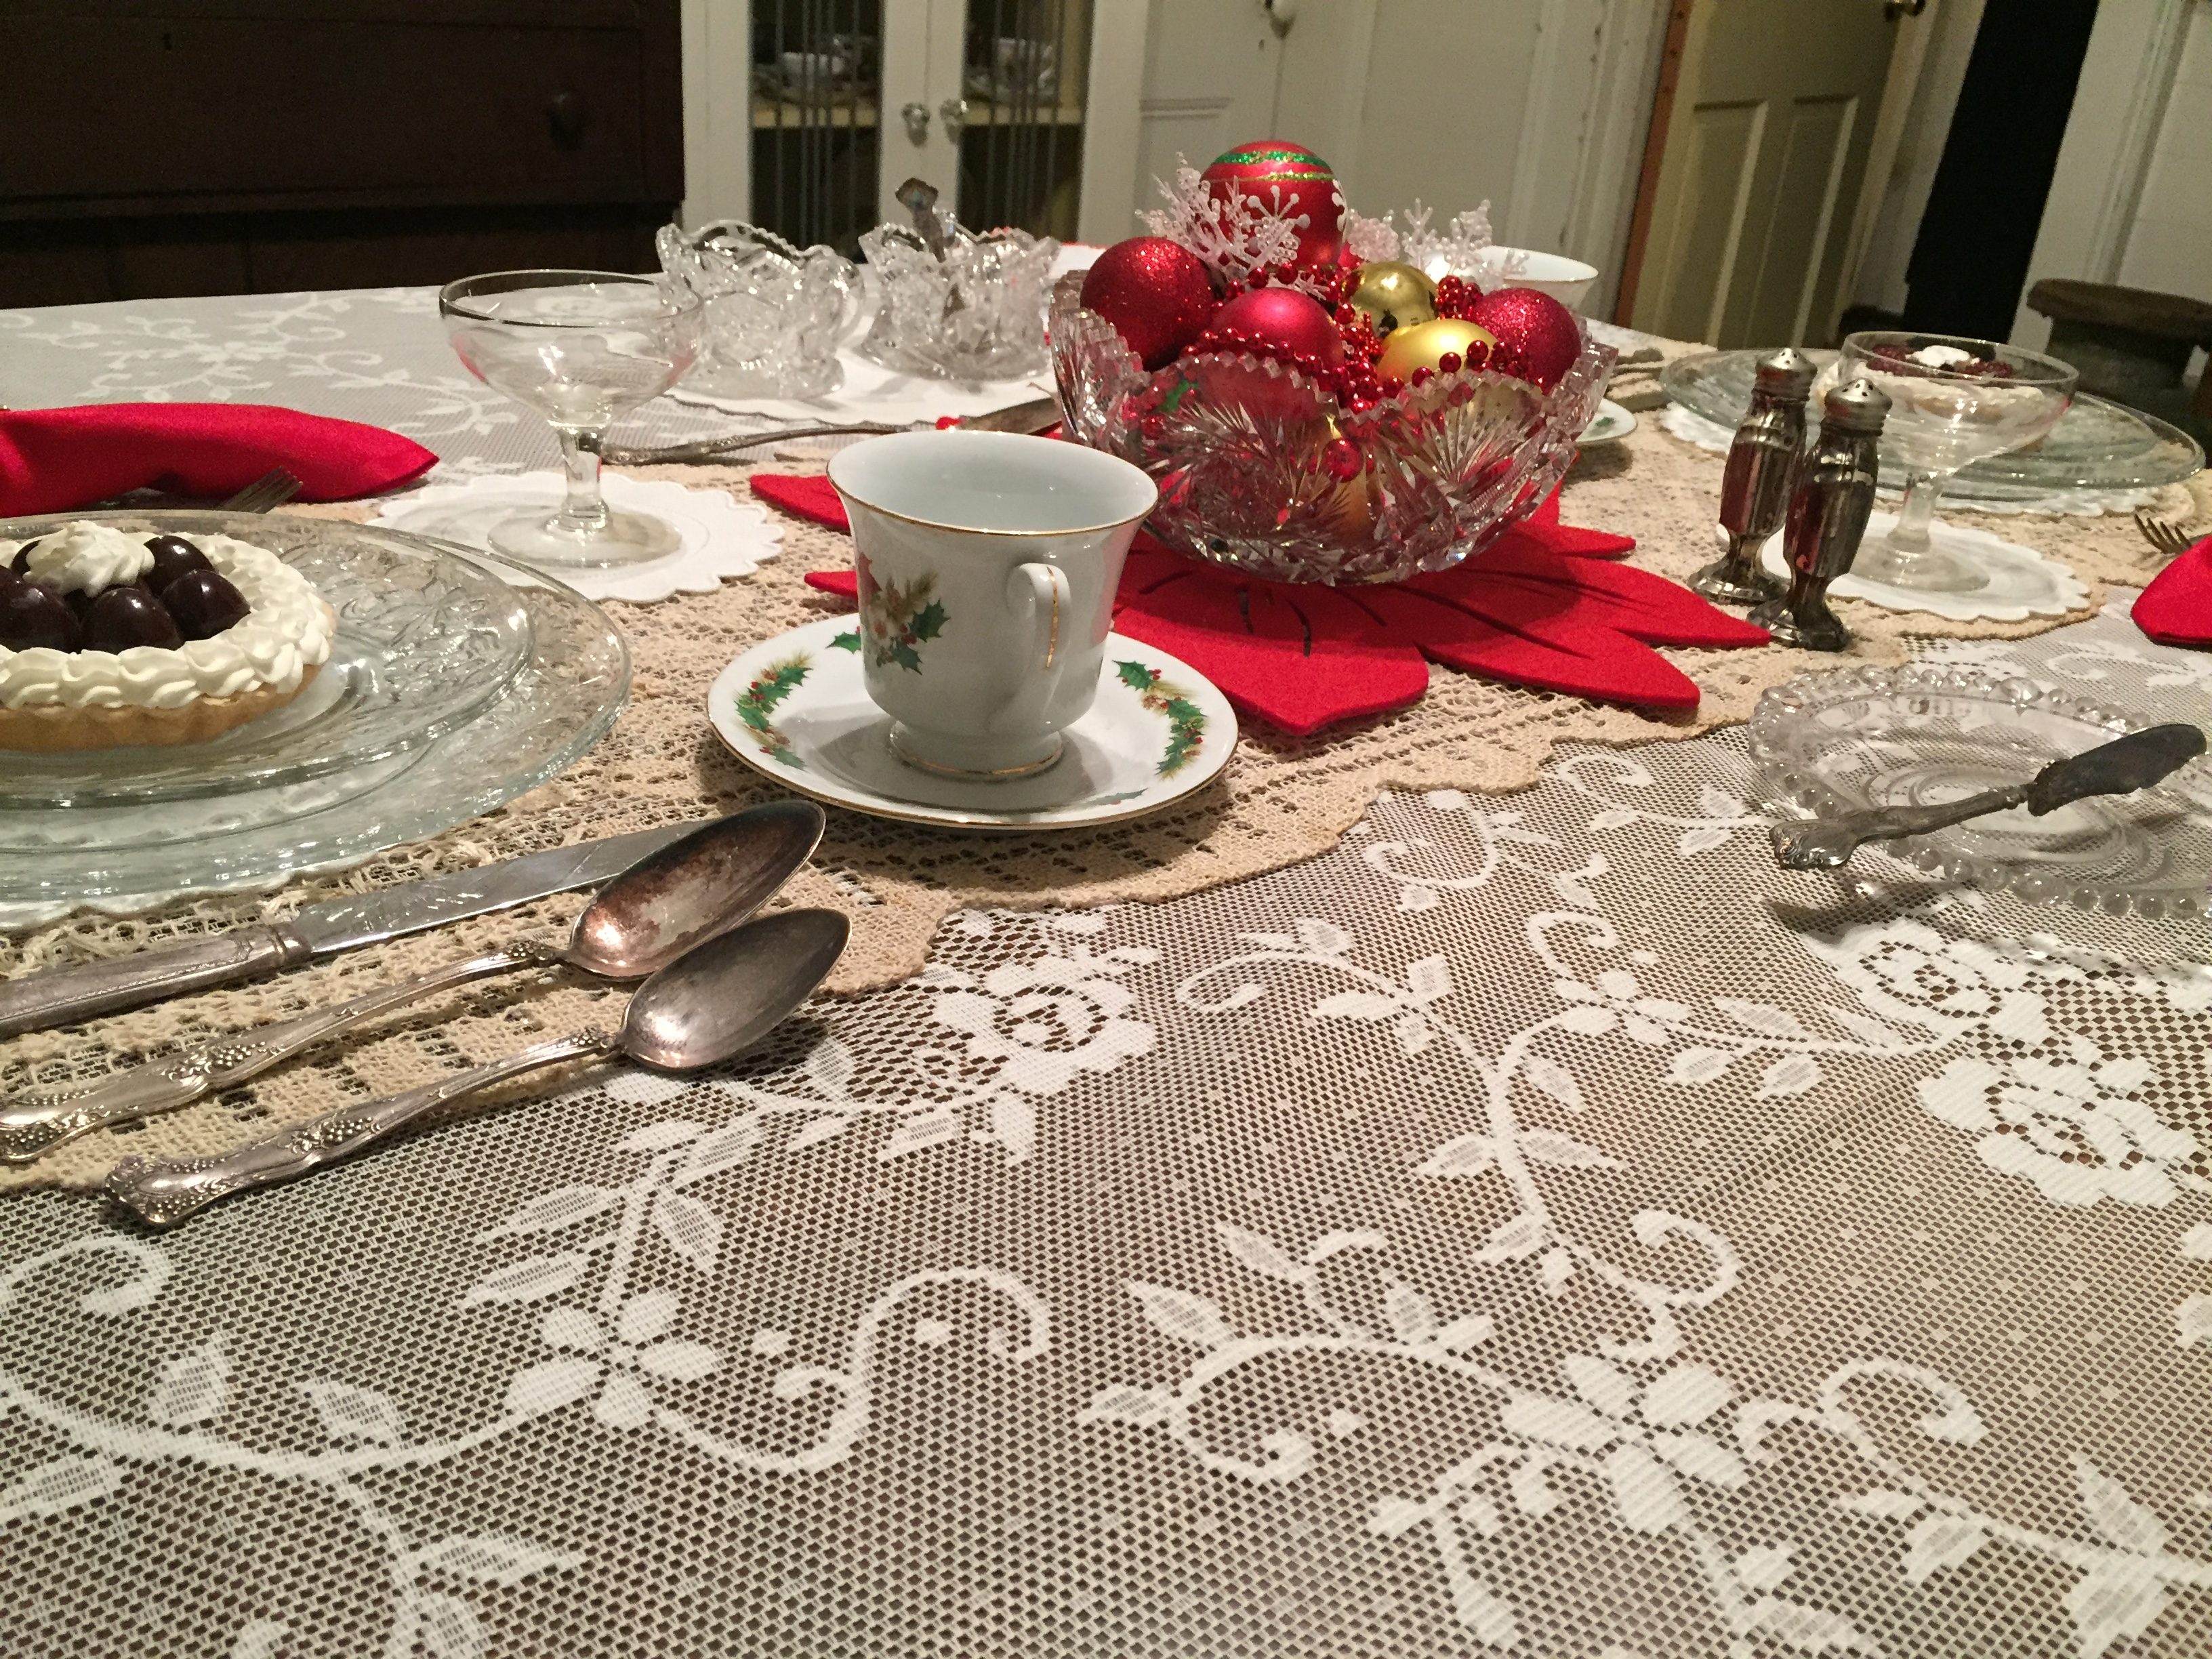 Christmas tablescape with white lace tablecloth at Winterville Christmas Festival